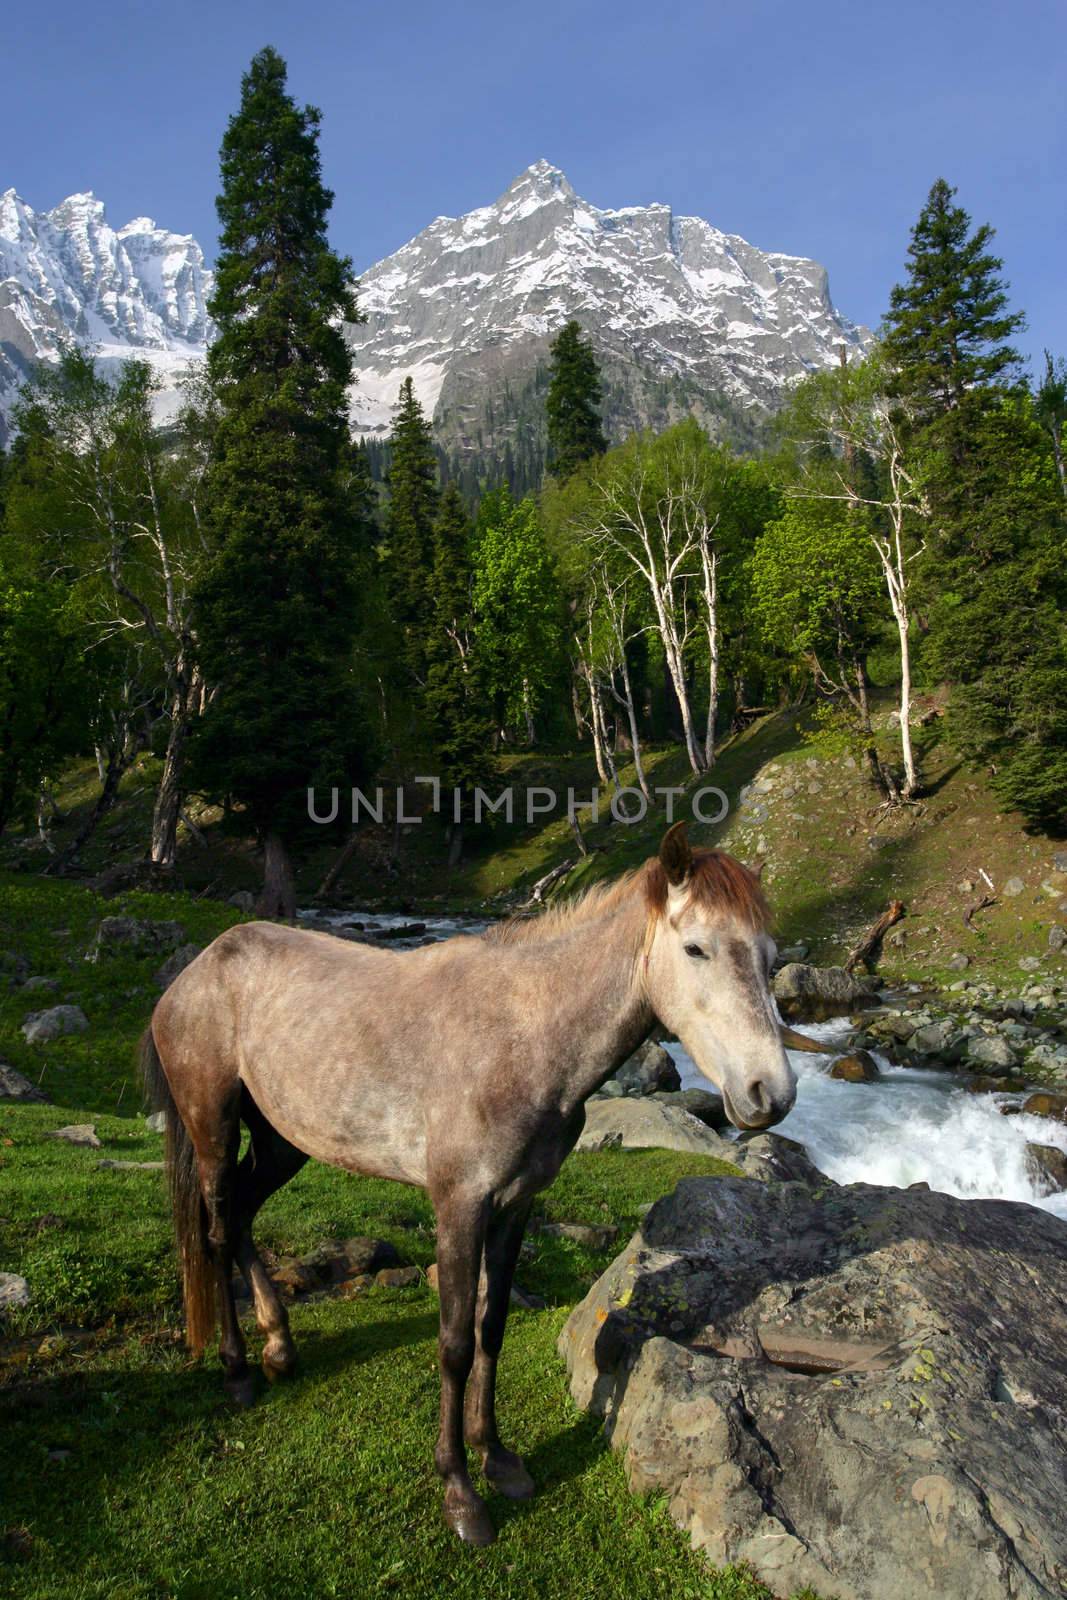 A horse near a forest and mountains in Kashmir, India.
